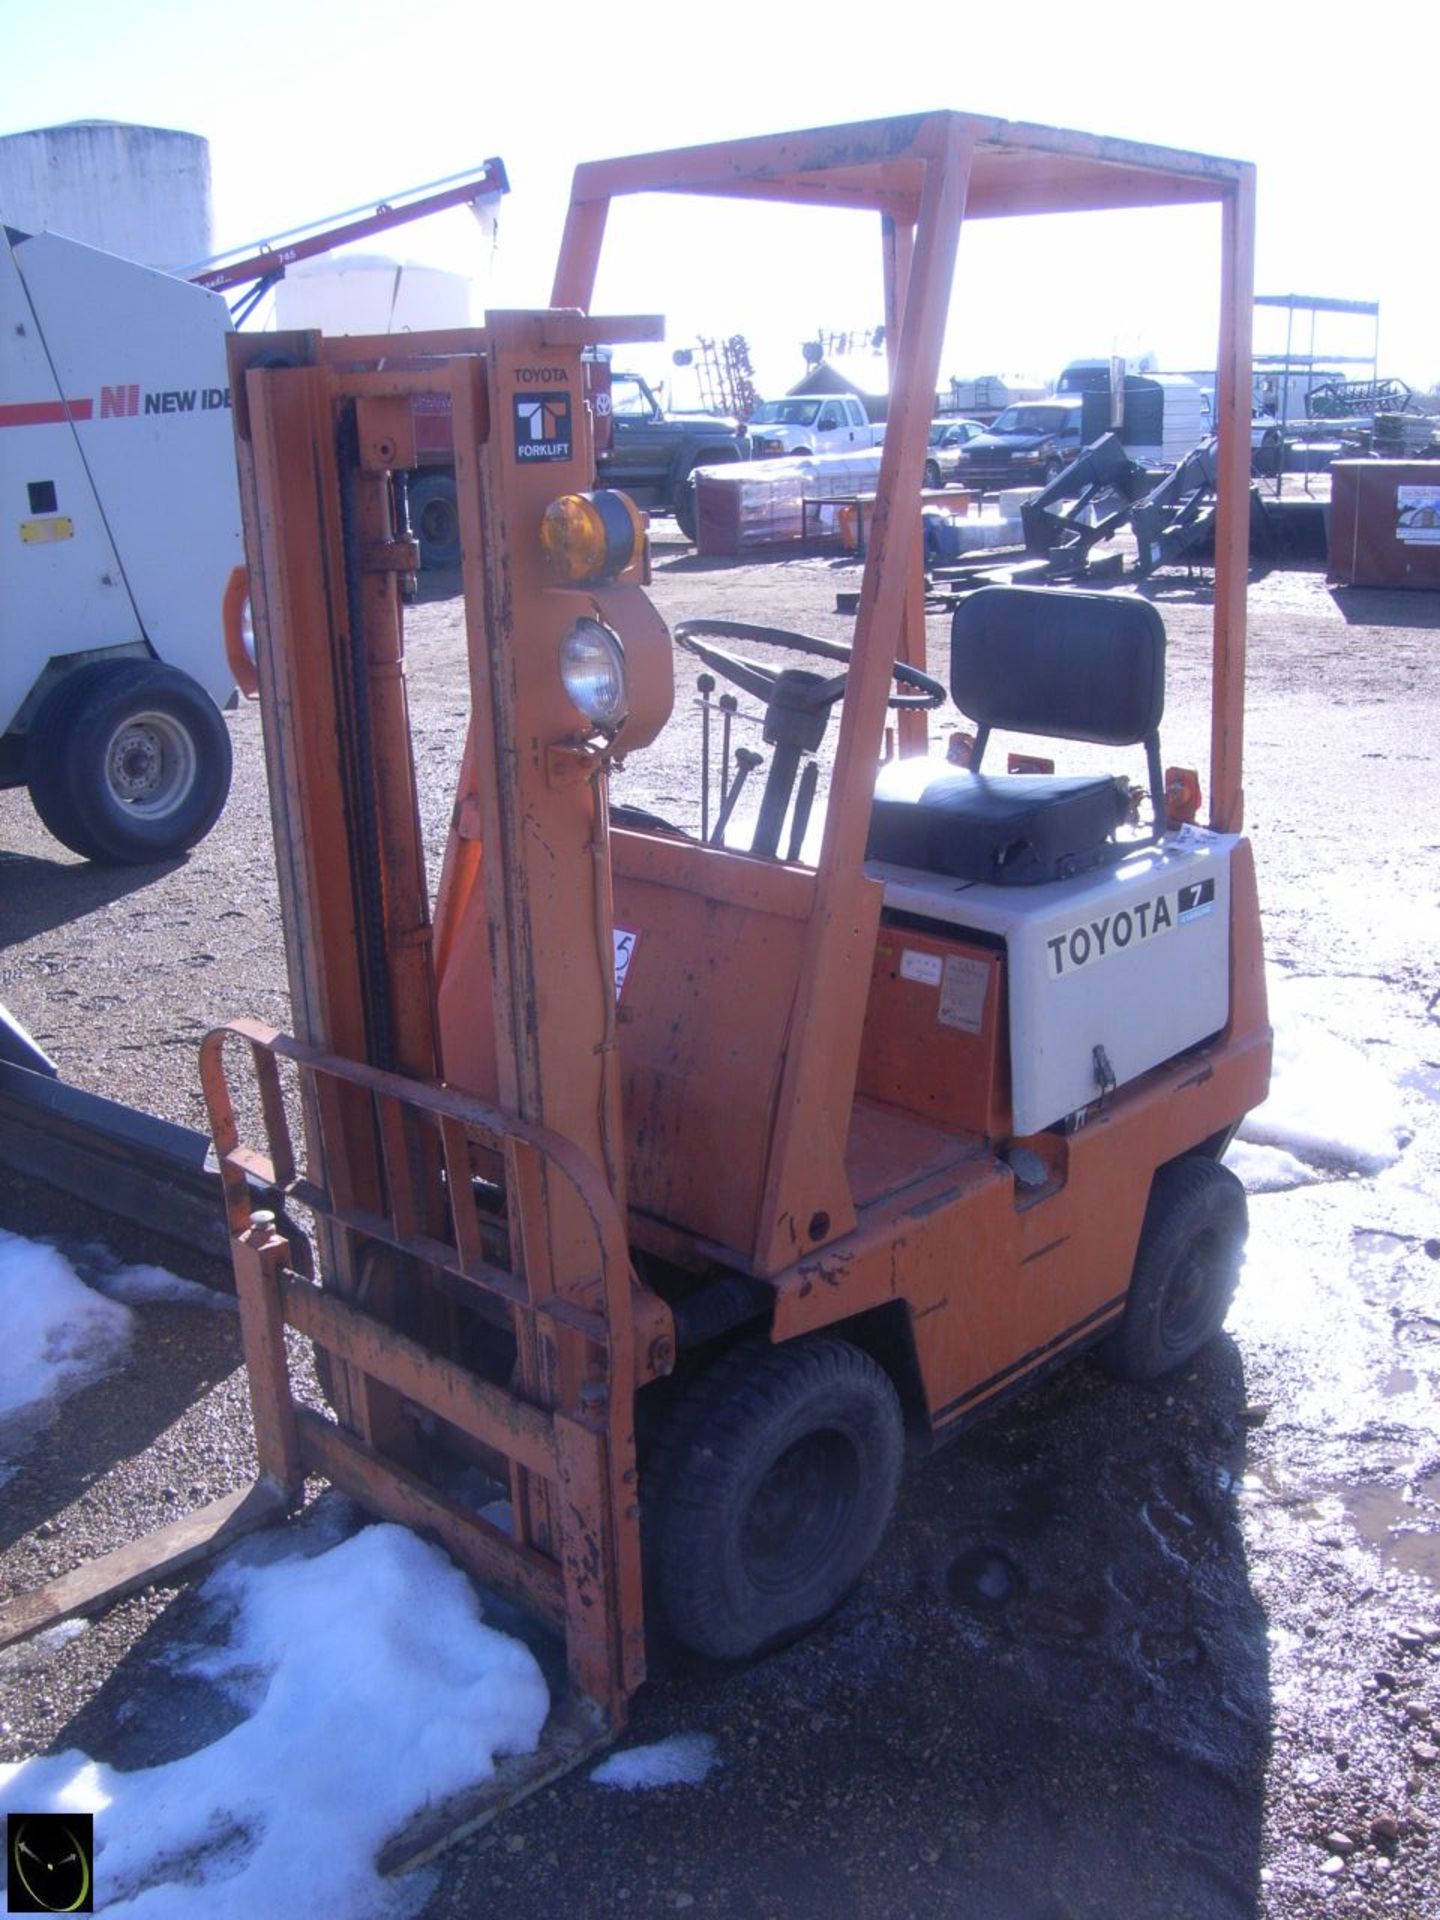 Toyota 7 fork lift SN 36106 - Image 6 of 7